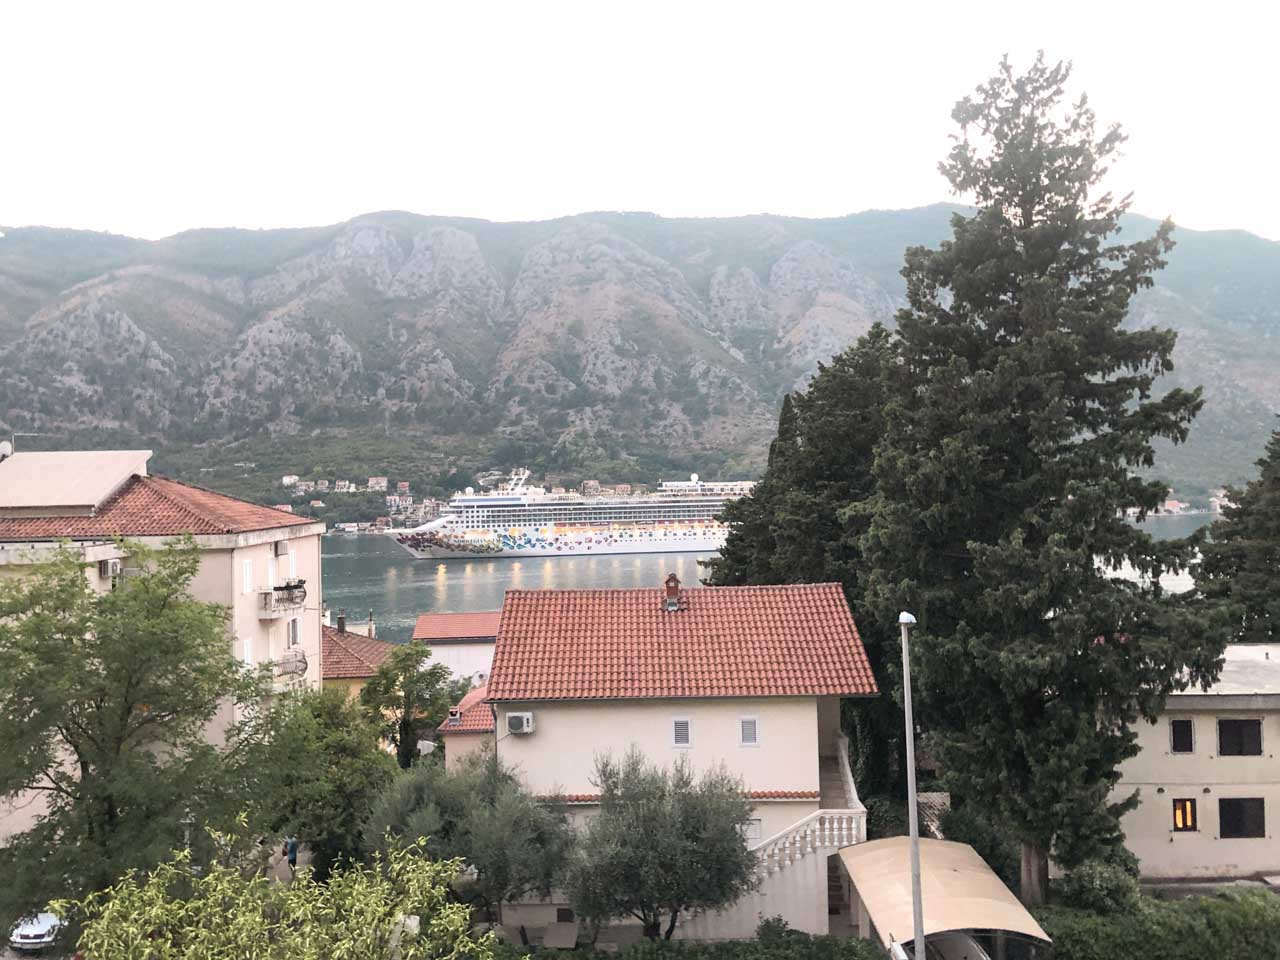 Cruise ship arriving in the port of Kotor